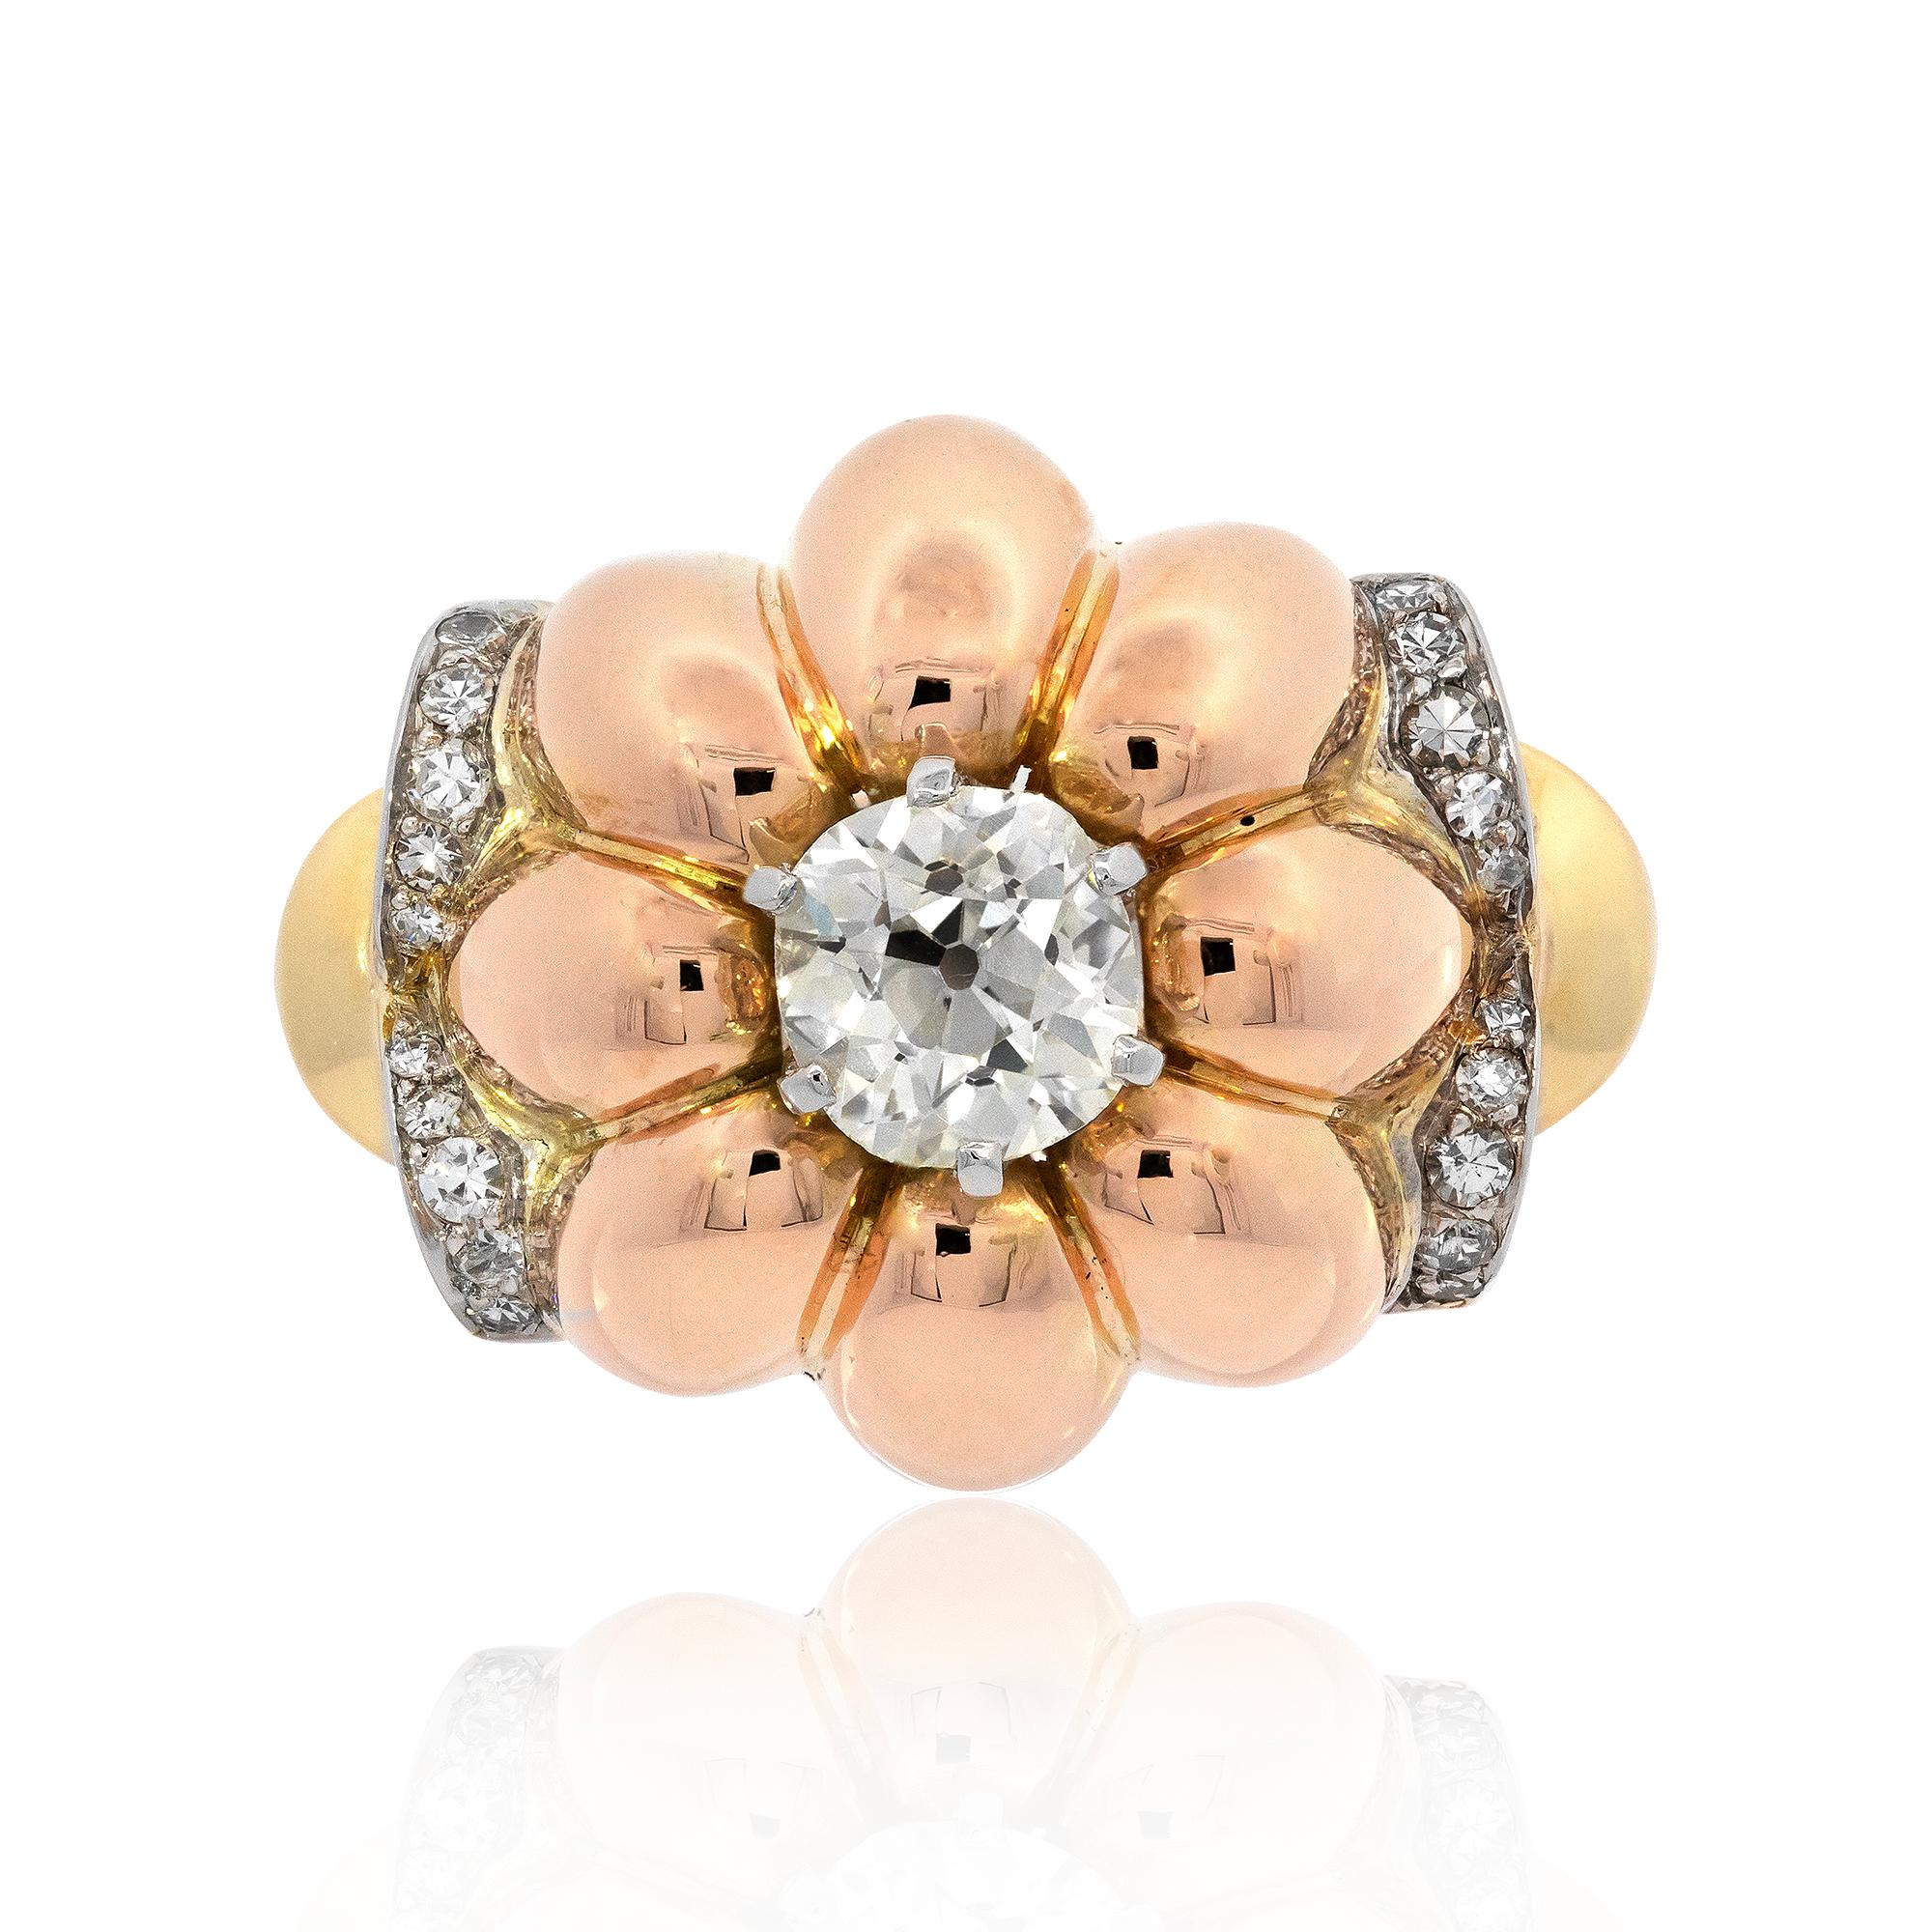 Retro French Made Diamond Flower Ring Circa 1940s For Sale 3